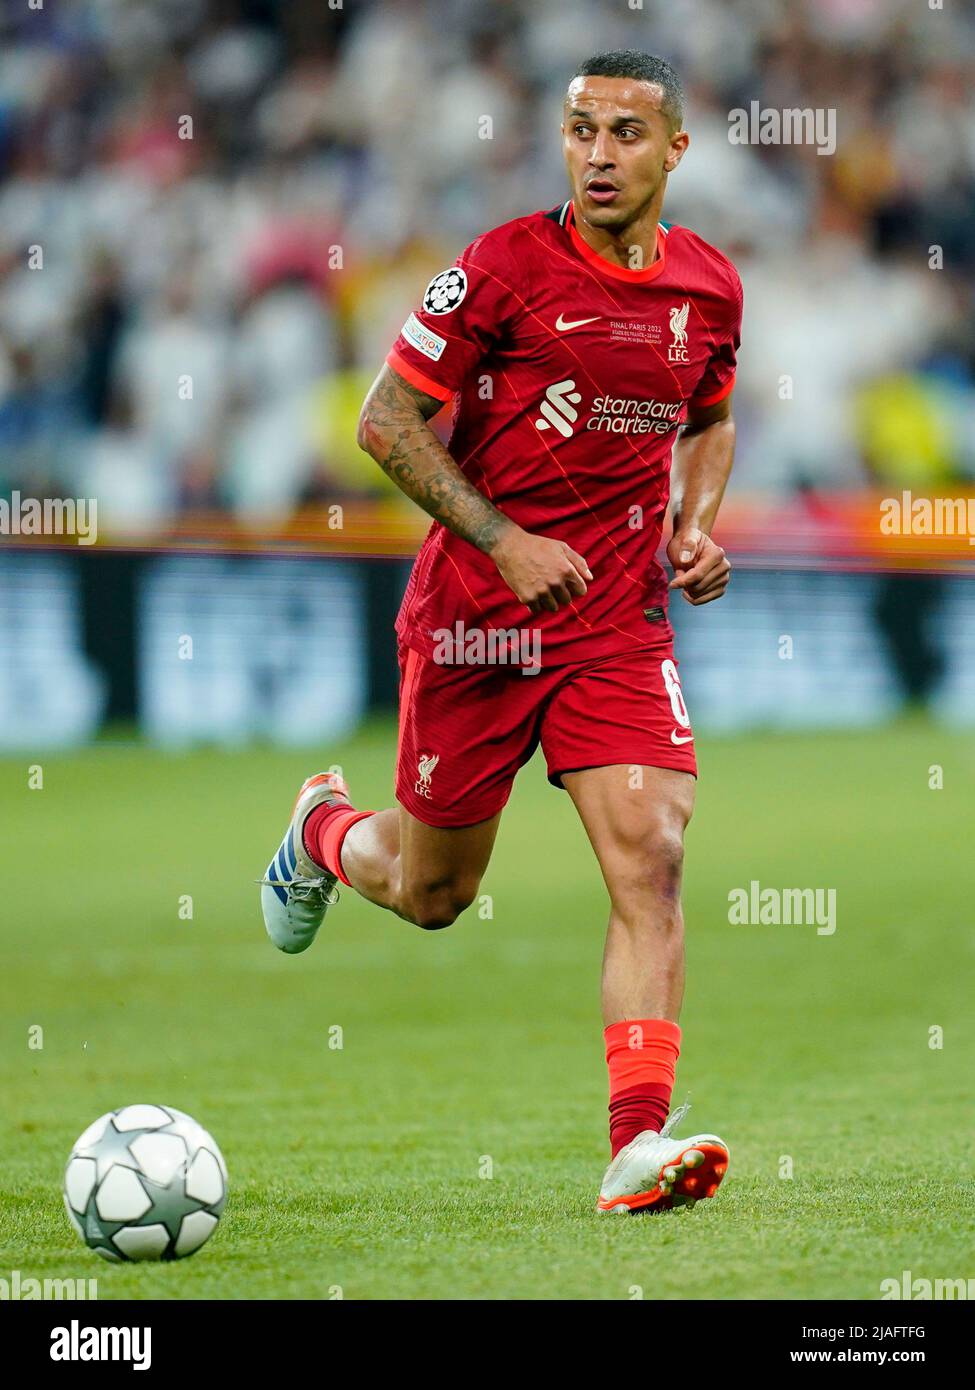 Thiago Alcantara of Liverpool FC during the UEFA Champions League Final match between Liverpool FC and Real Madrid played at Stade de France on May 28, 2022 in Paris, France. (Photo / Magma) Stock Photo